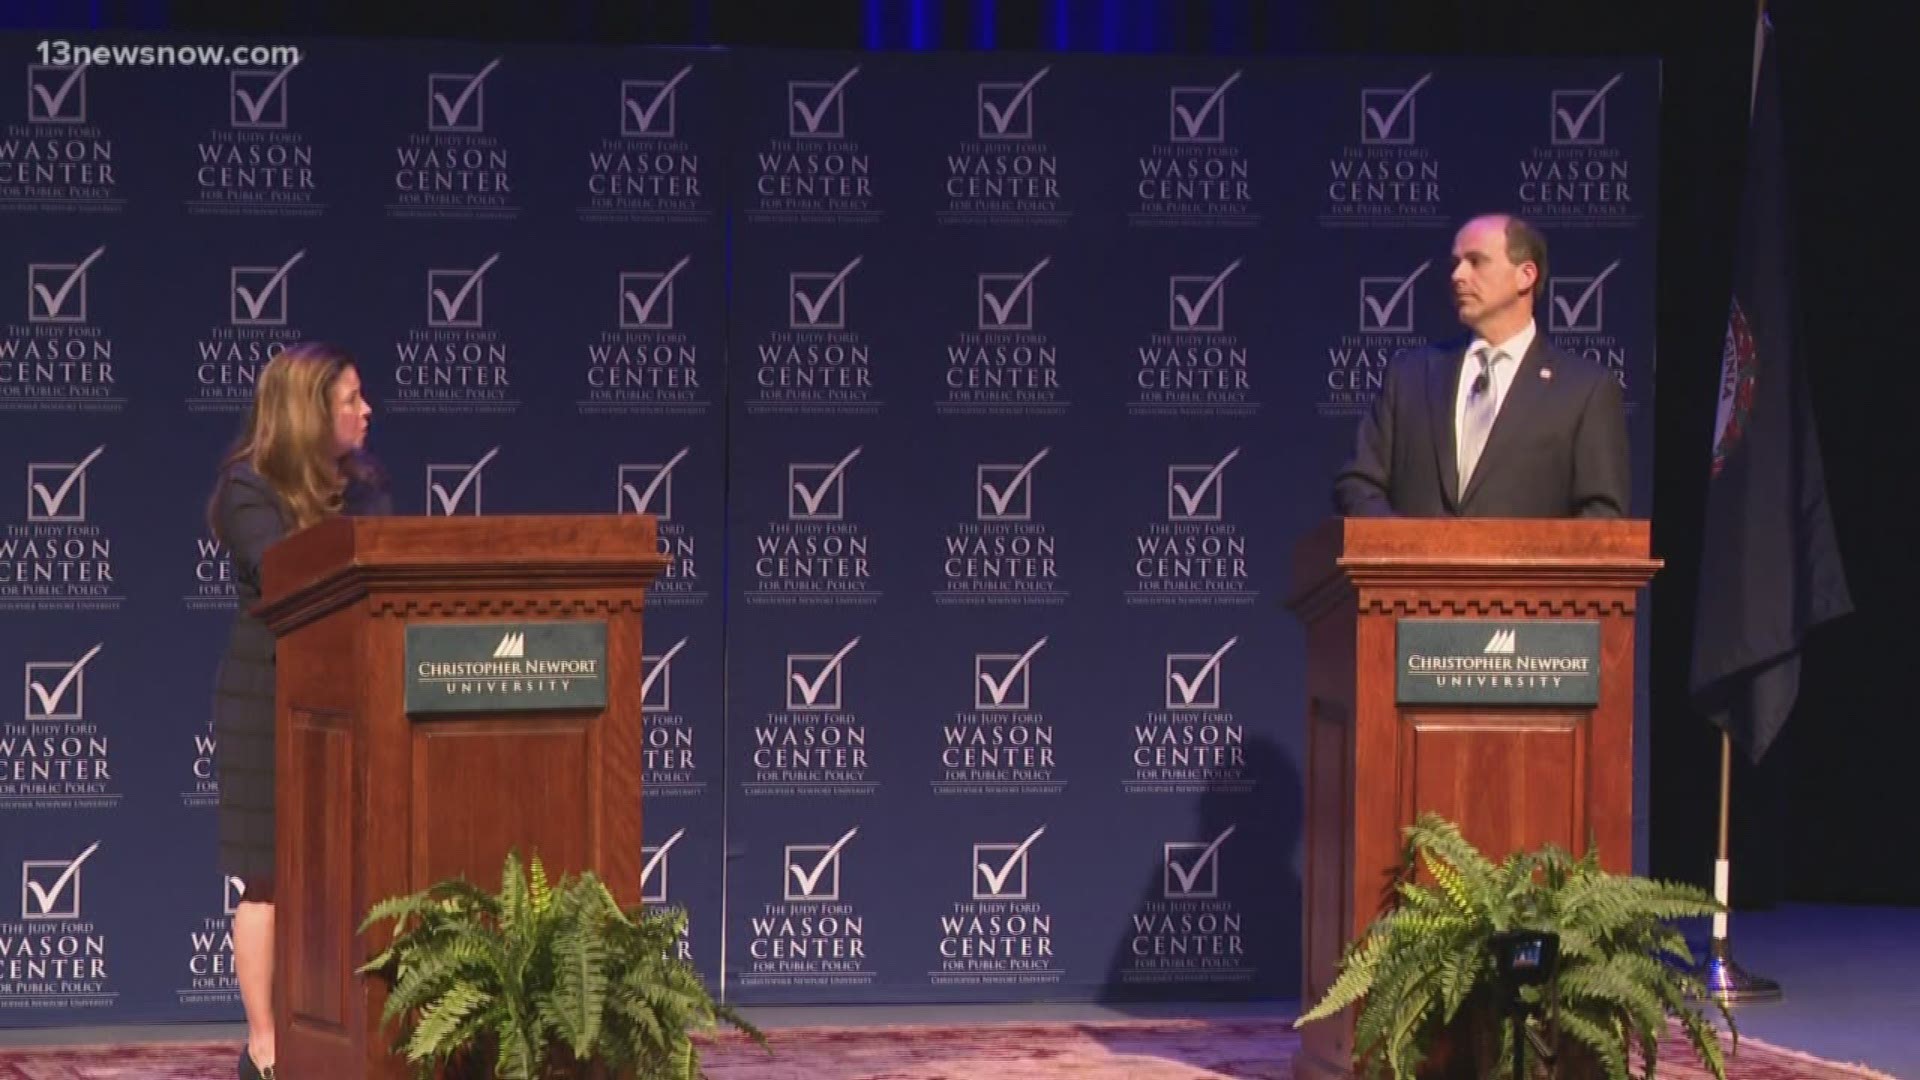 Based on the tumultuous ending of the 2017 election, it's no surprise things got heated during Wednesday night's debate at CNU.